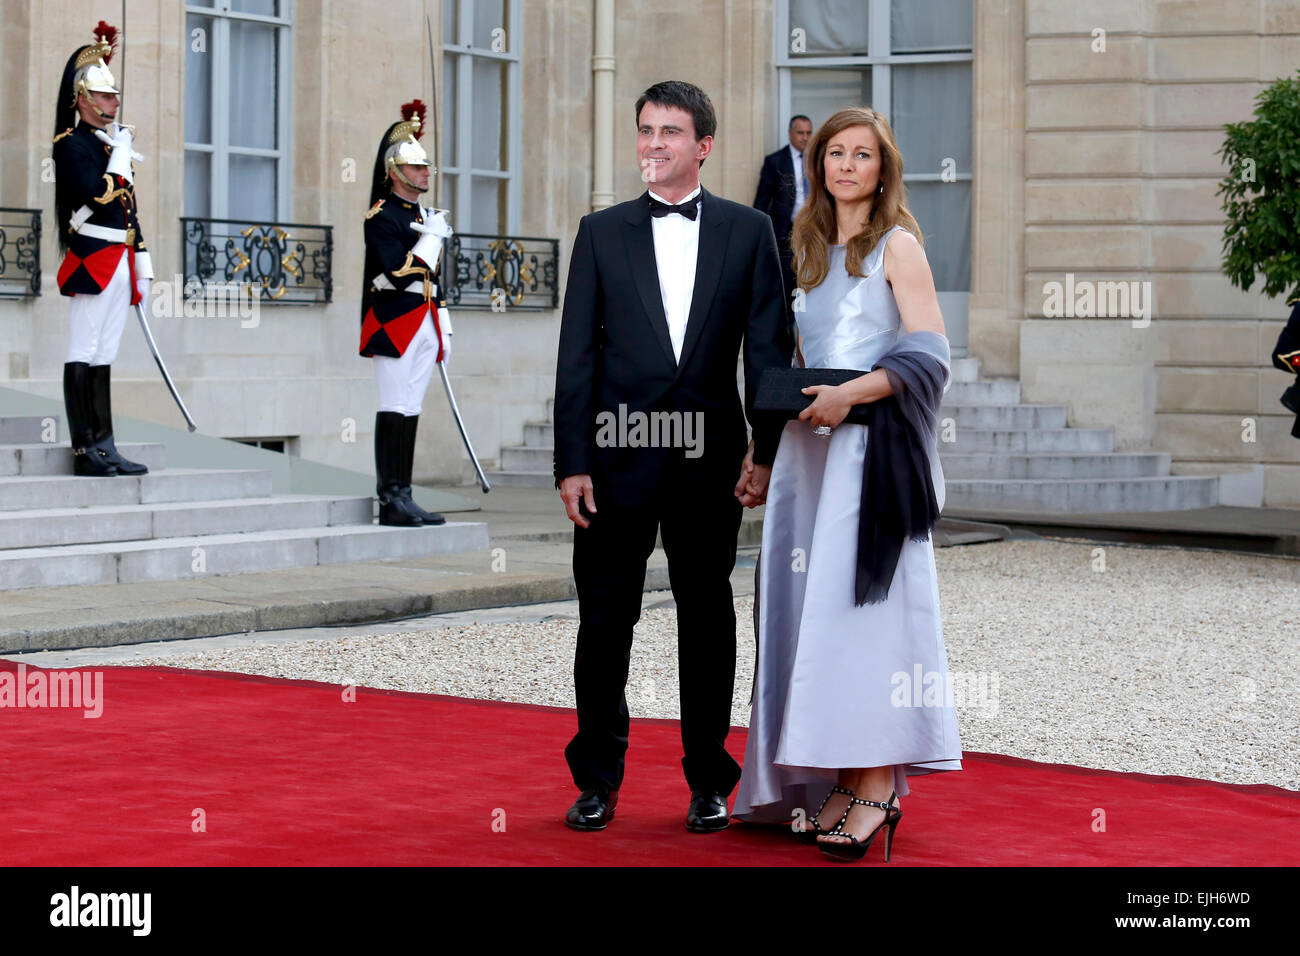 Paris, France. 06th June, 2014. French Prime Minister Manuel Valls (L) and his wife Anne Gravoin arrive at Elysee Palace for state dinner in honor of the Queen Elizabeth II. © Nicolas Kovarik/Pacific Press/Alamy Live News Stock Photo